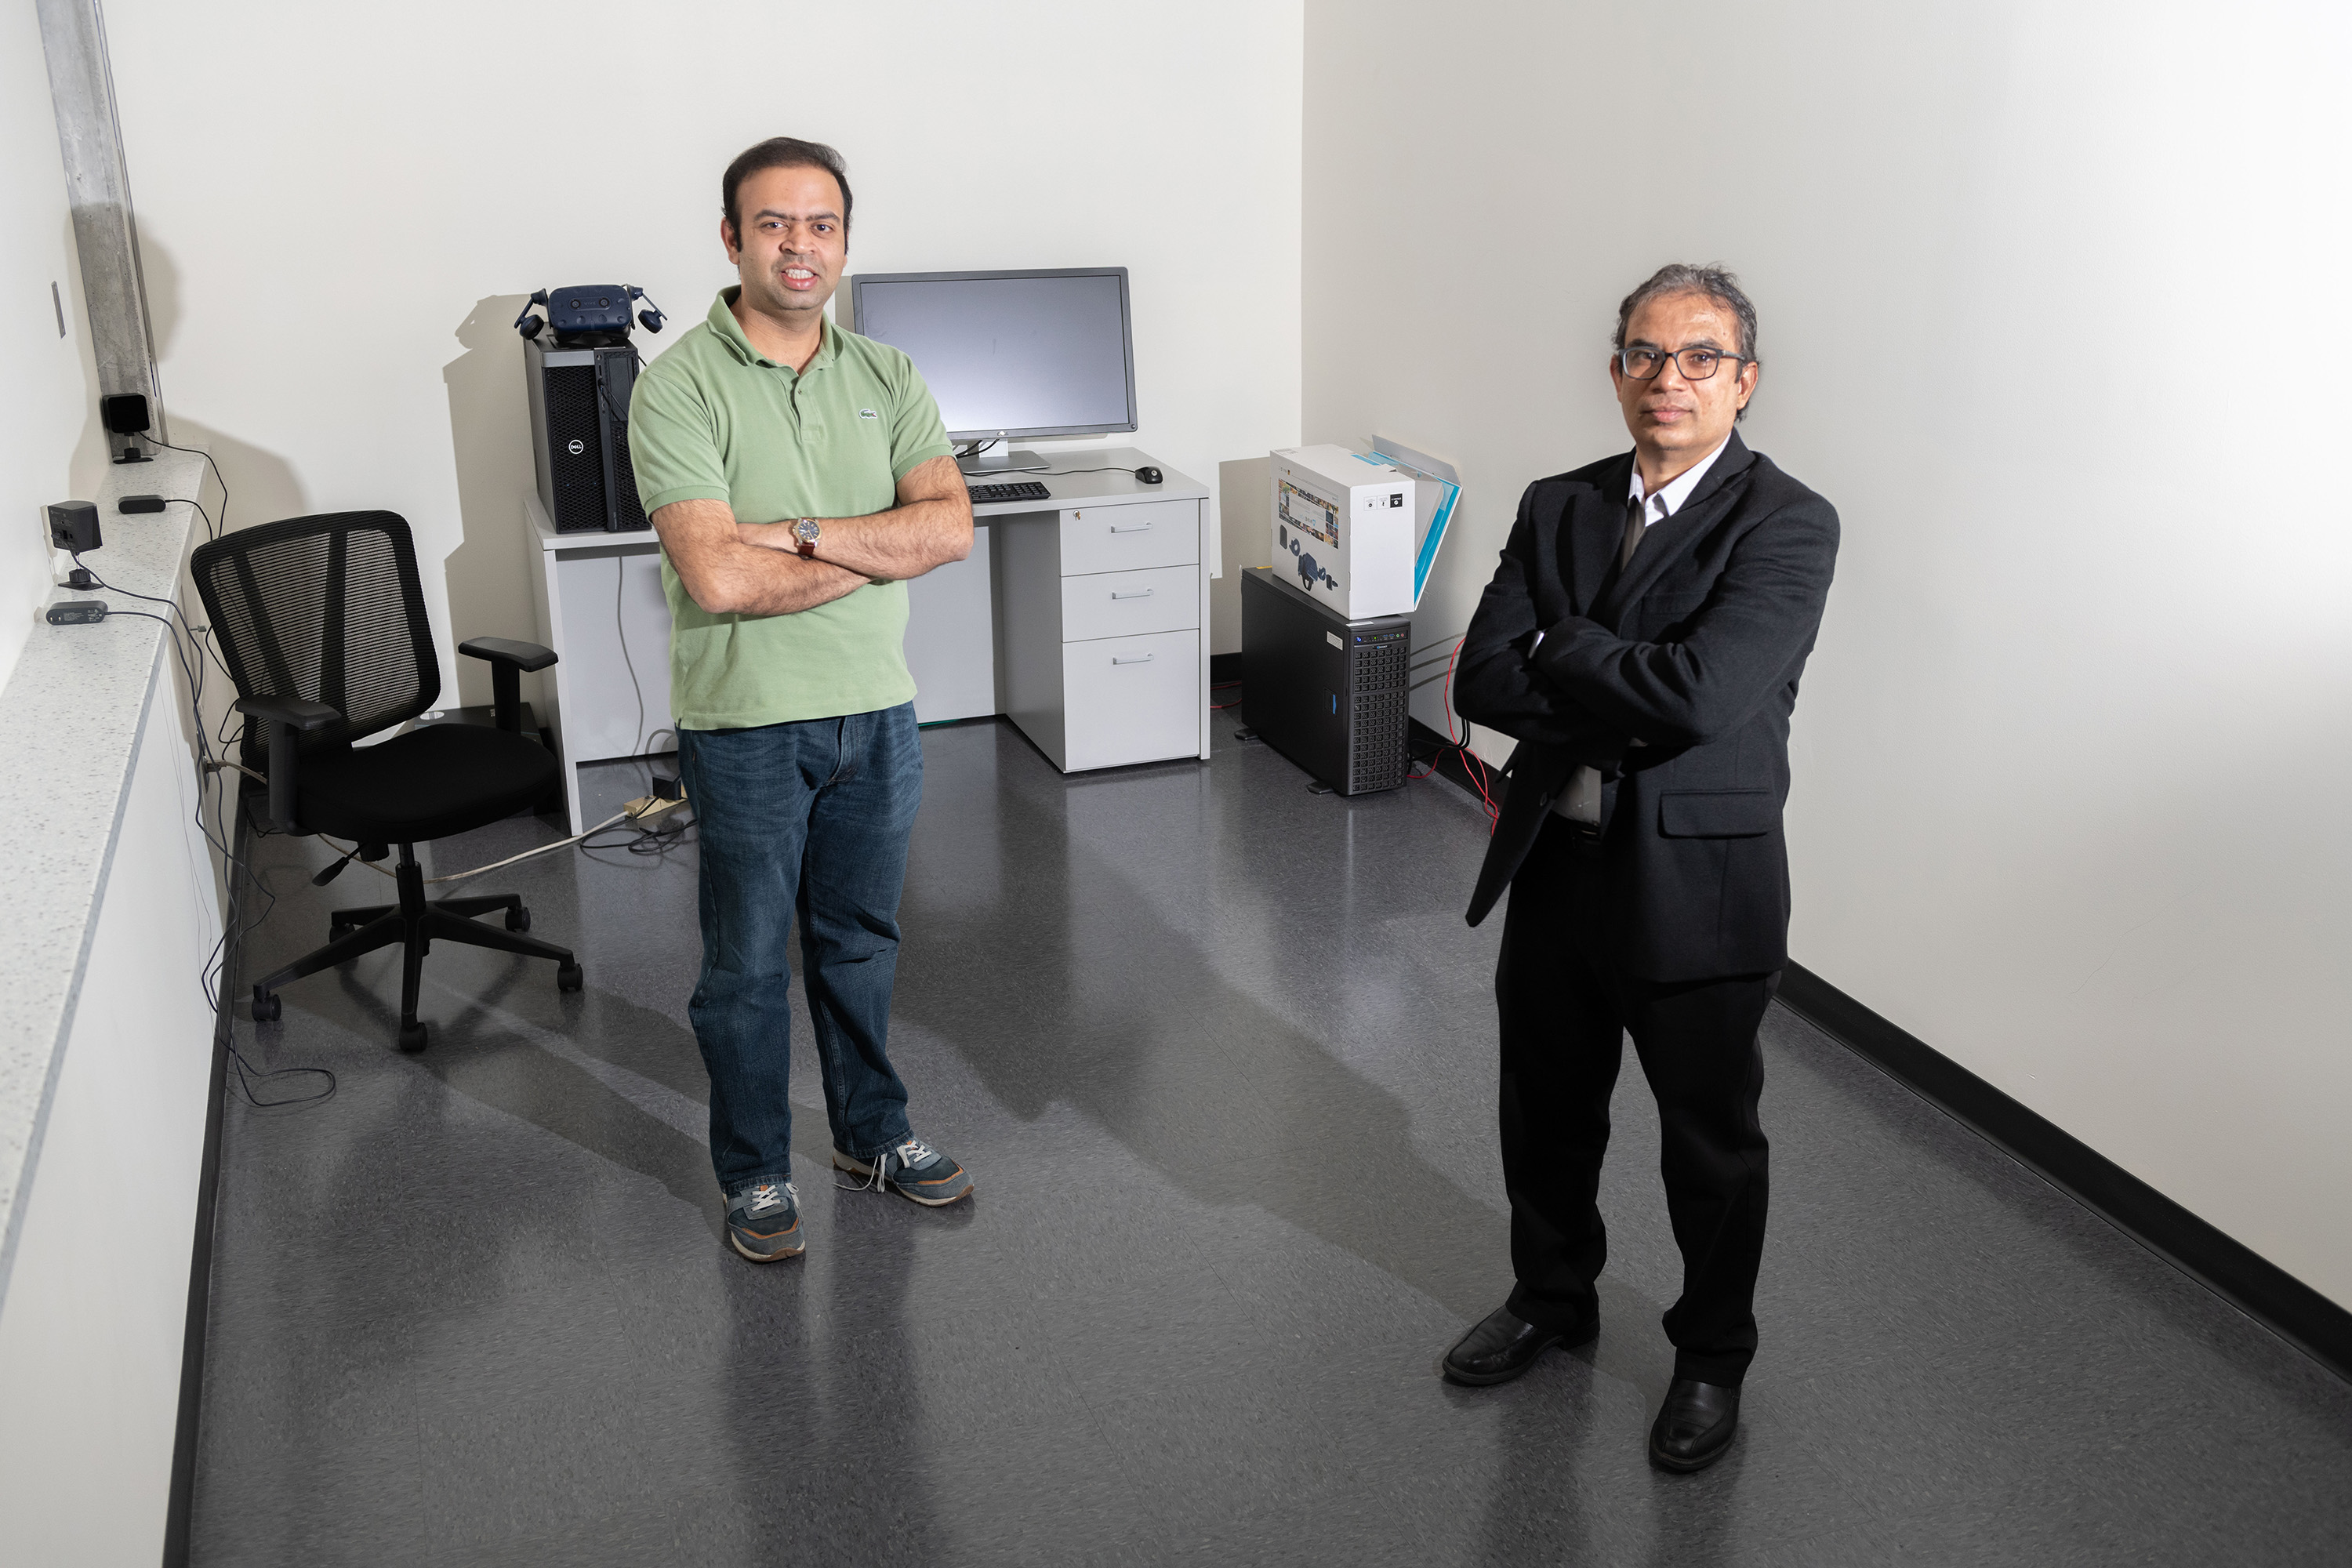 Anand Chandrasekaran, a postdoctoral researcher, and Rampi Ramprasad, a professor in the School of Materials Science and Engineering, stand in a room with a high-powered computer dedicated to machine learning. (Credit: Allison Carter)